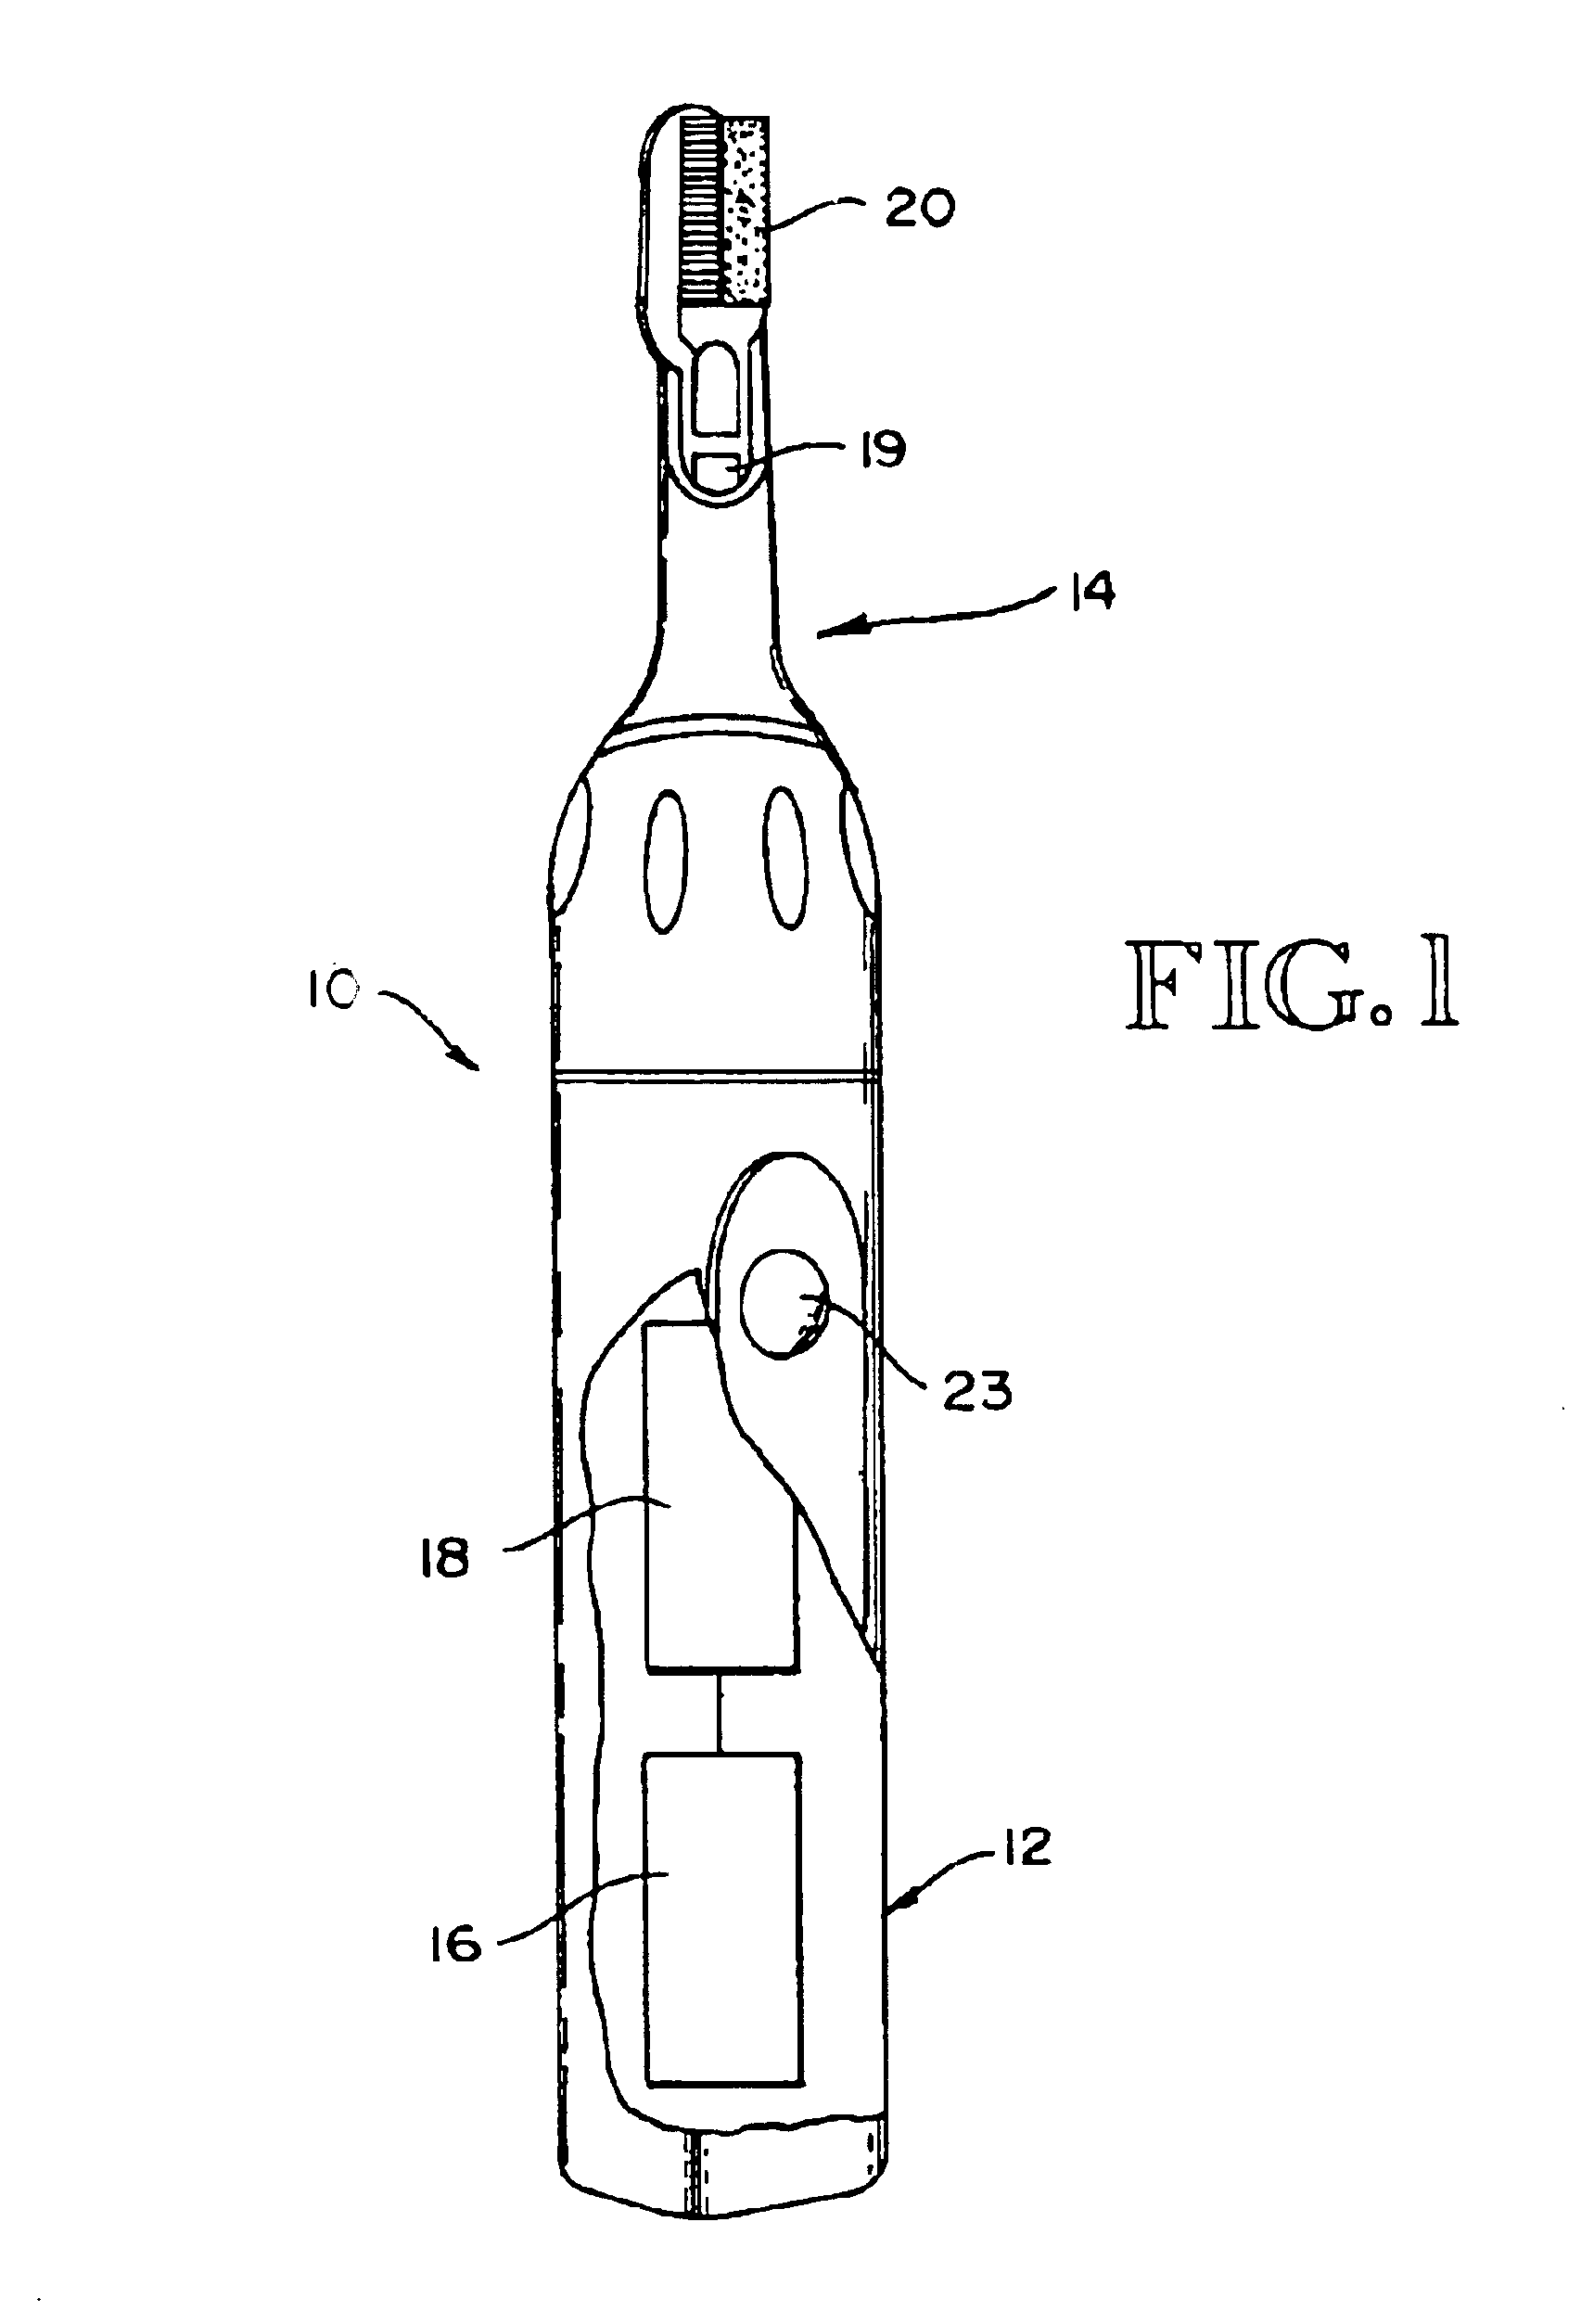 Short-life power toothbrush for trial use